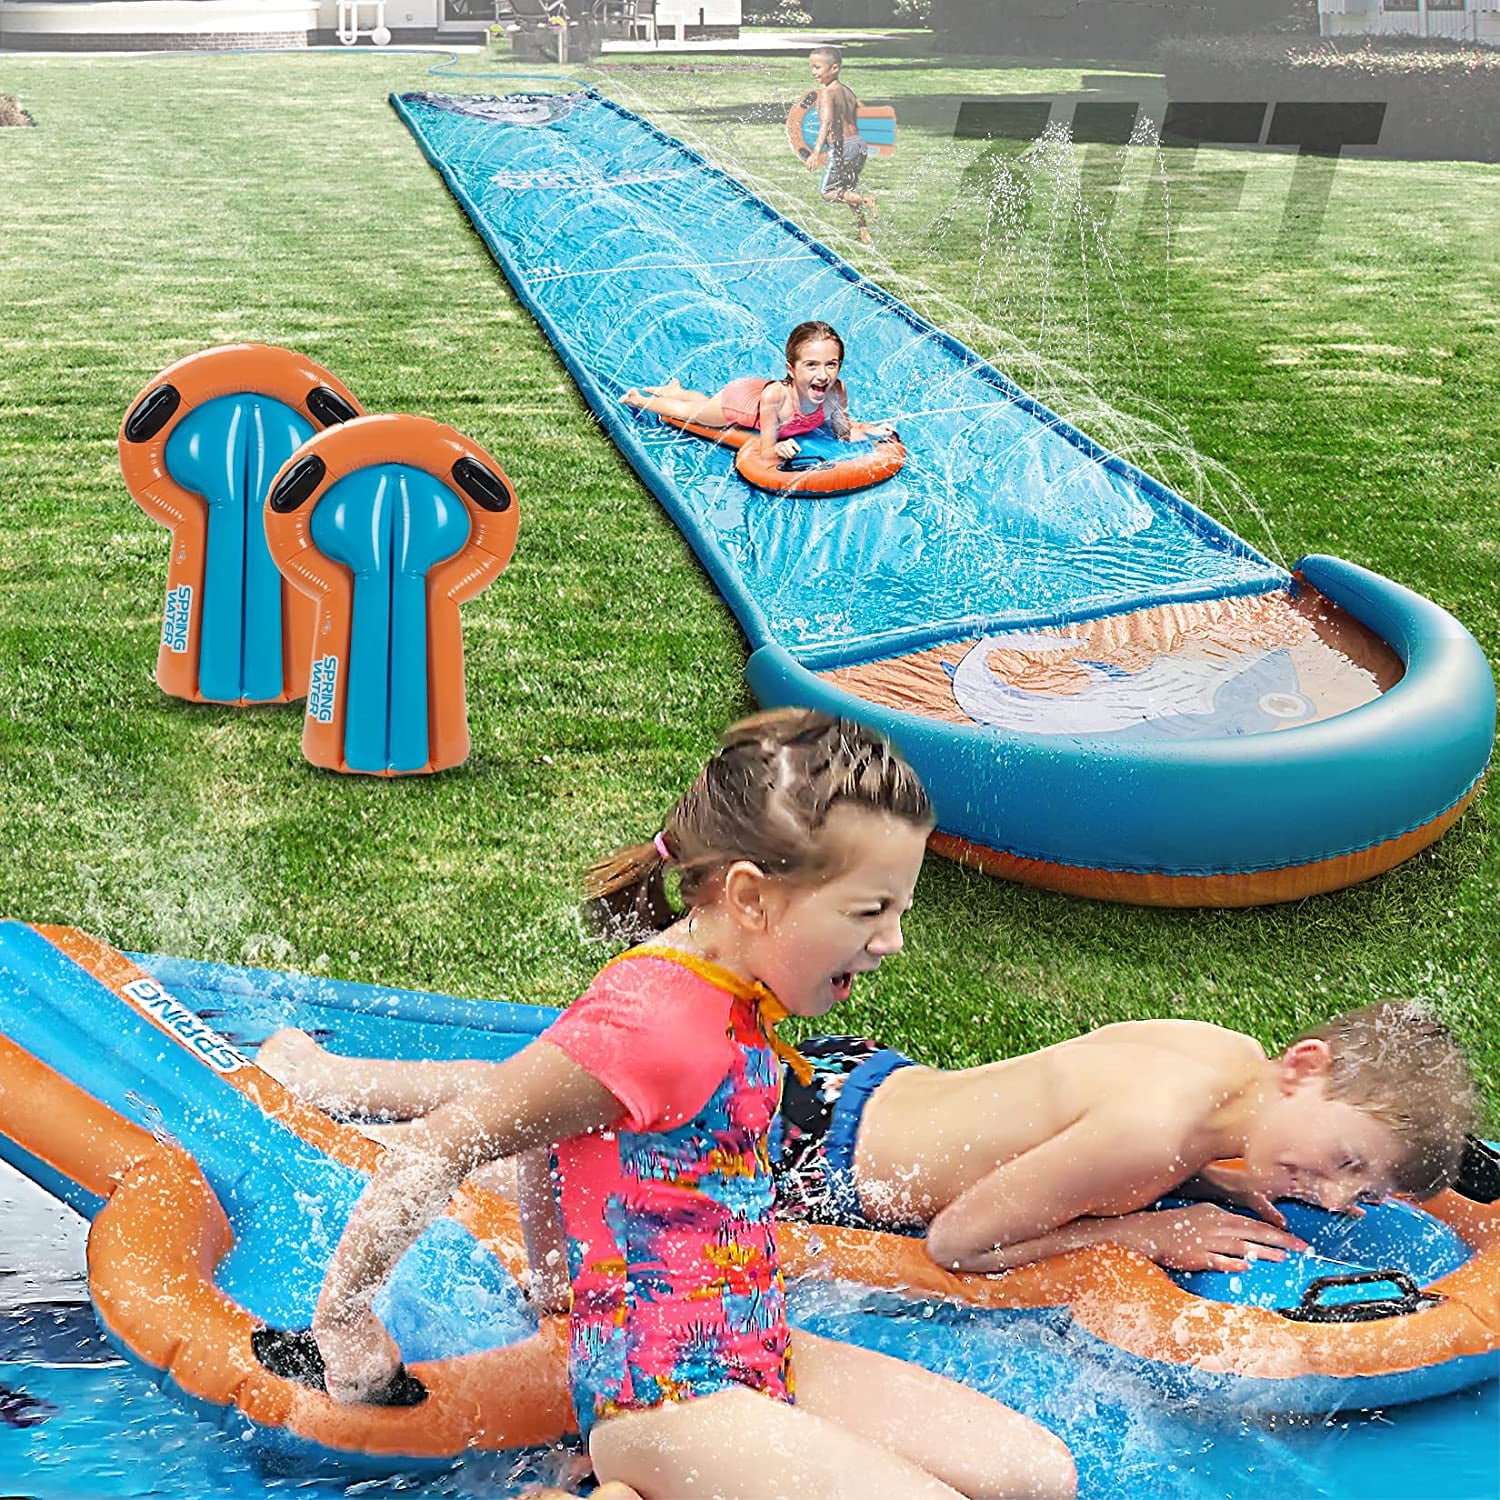 31ft Racing Slip with 2 Bodyboards Spring Water Slip Lawn Water Slide Water Slide for Kids and Adults Backyard with Water Sprayer in Both Side 